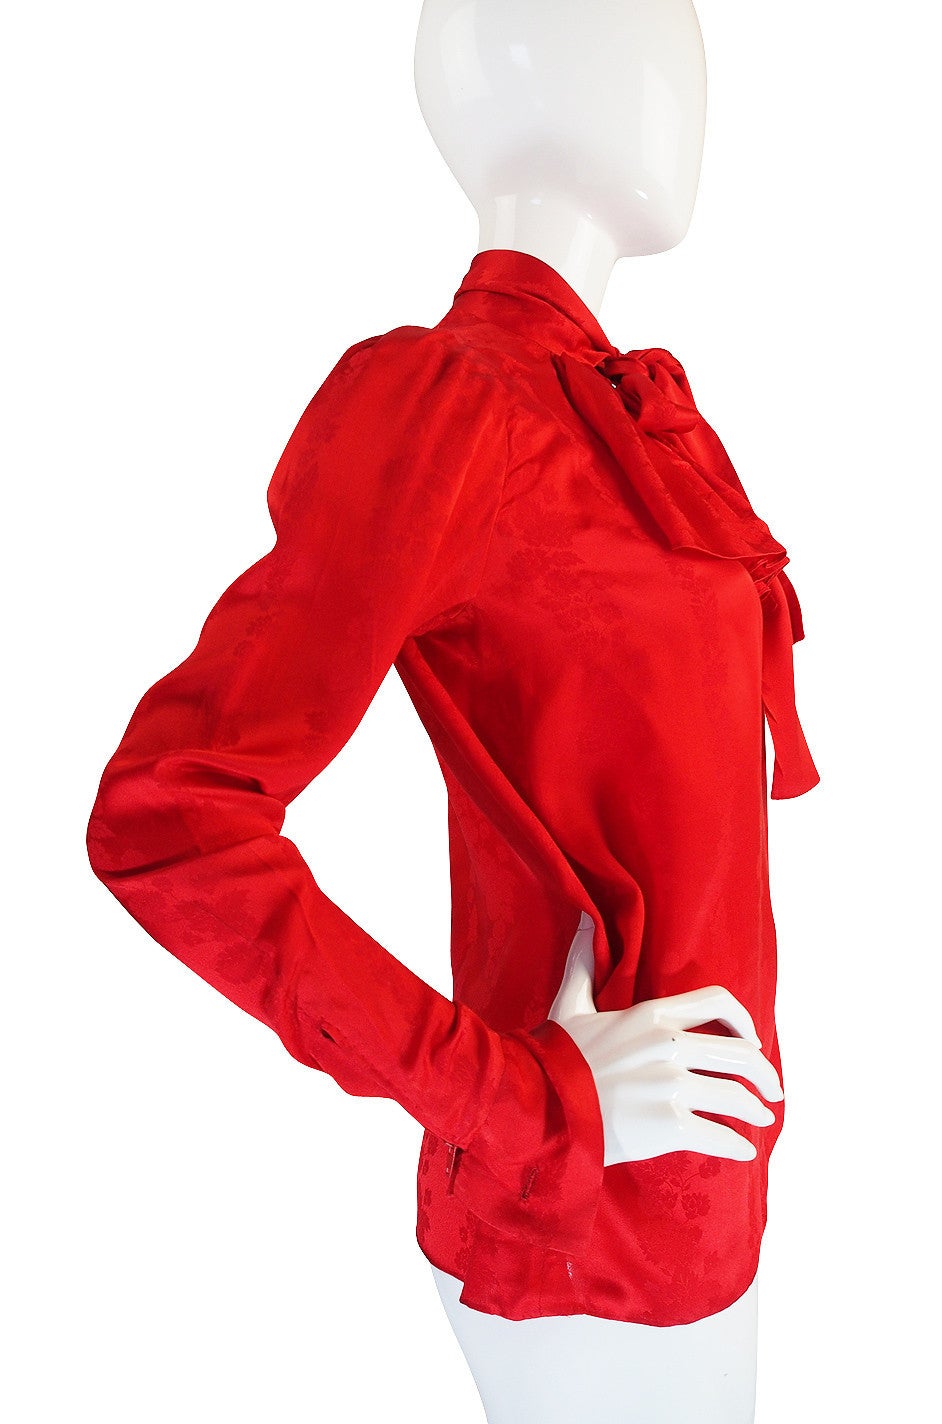 1979 Yves Saint Laurent Haute Couture Red Silk Top In Excellent Condition For Sale In Rockwood, ON